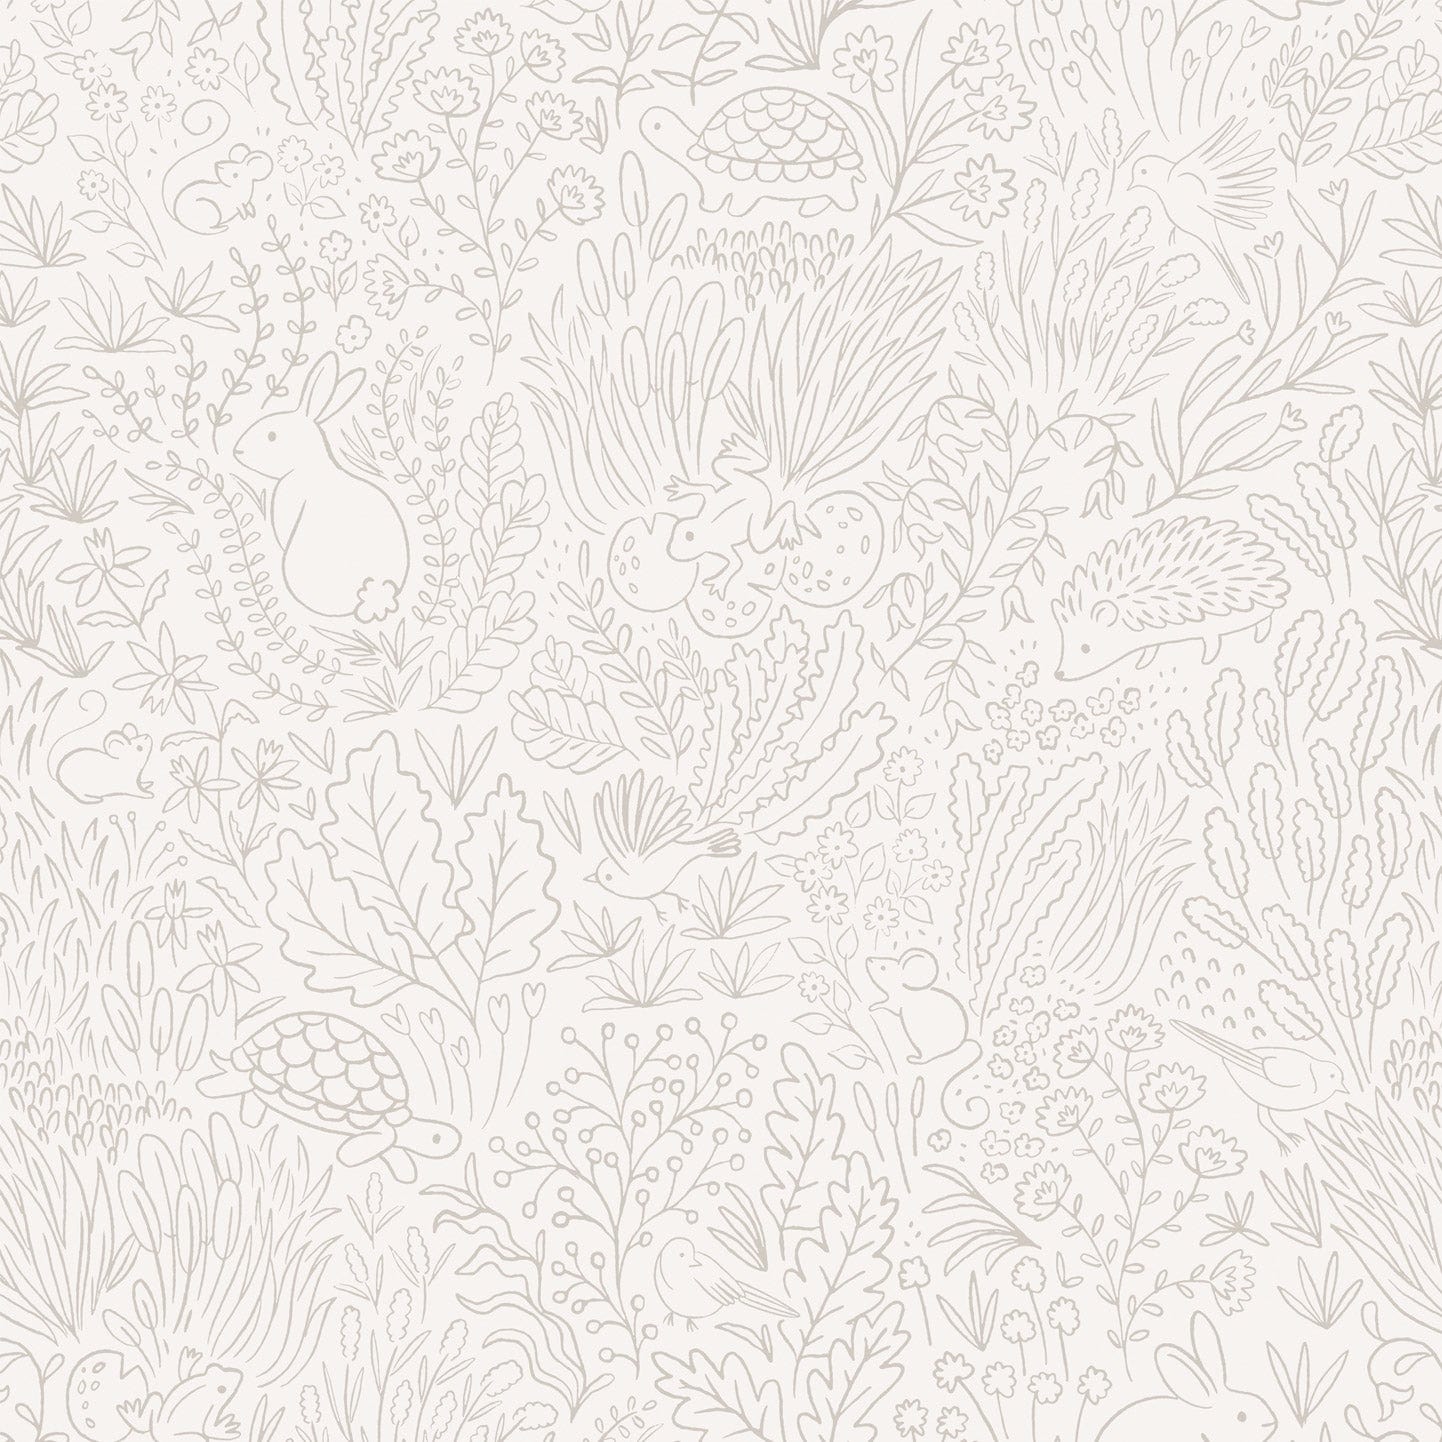 Wallpaper sample of Grey line work animals and florals such as rabbits, hedgehogs, frogs, tortoise, mice and birds. 